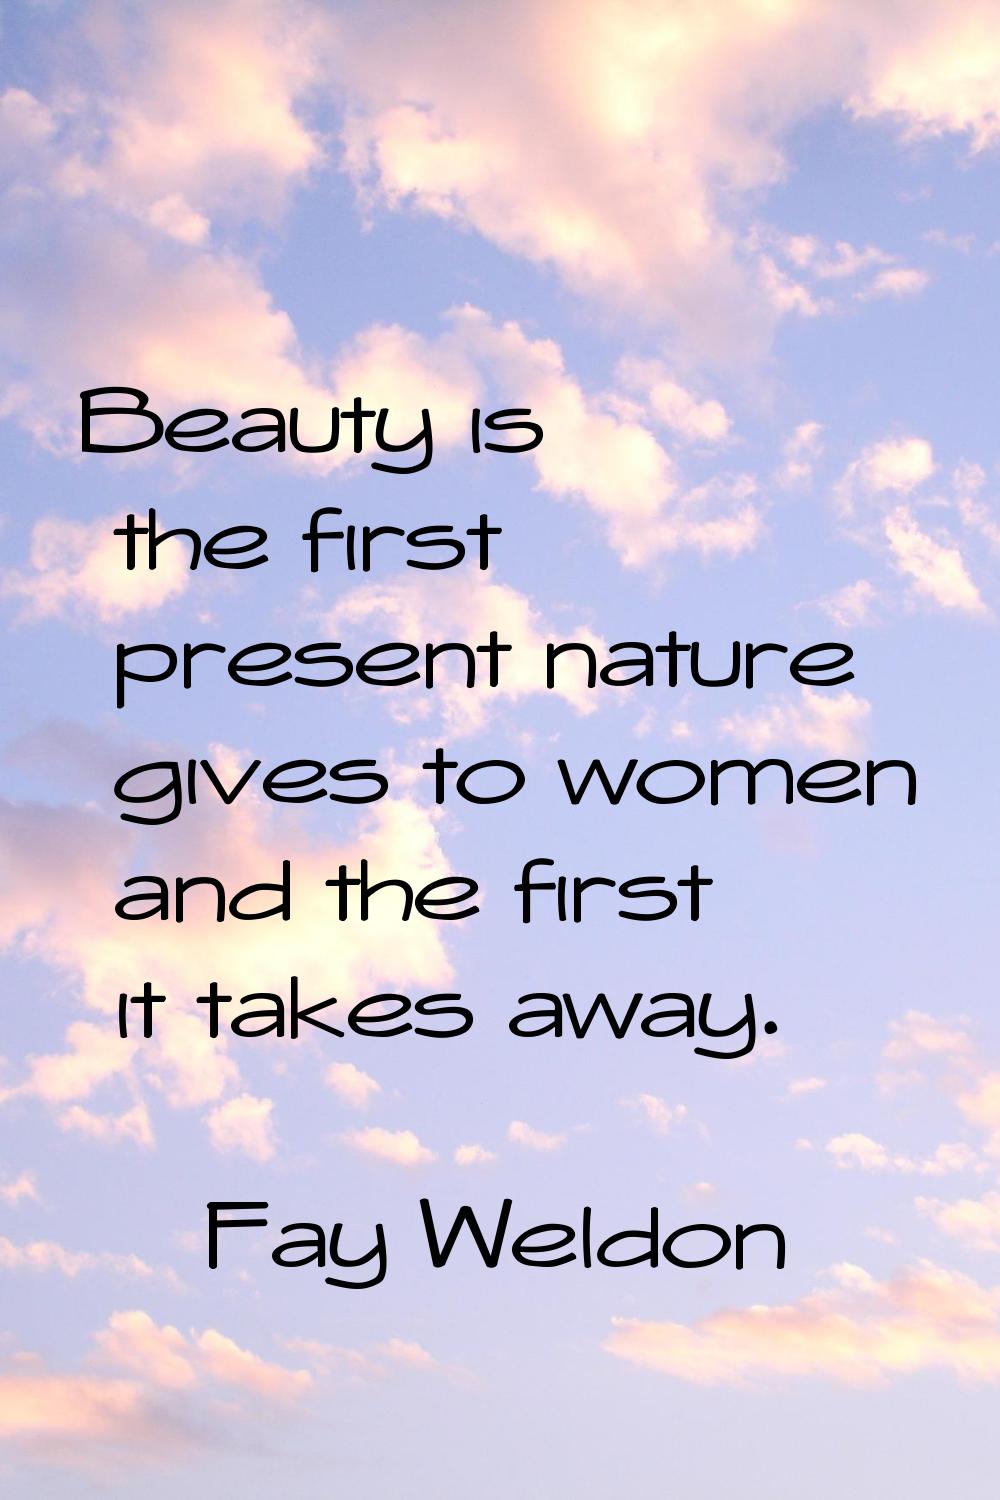 Beauty is the first present nature gives to women and the first it takes away.